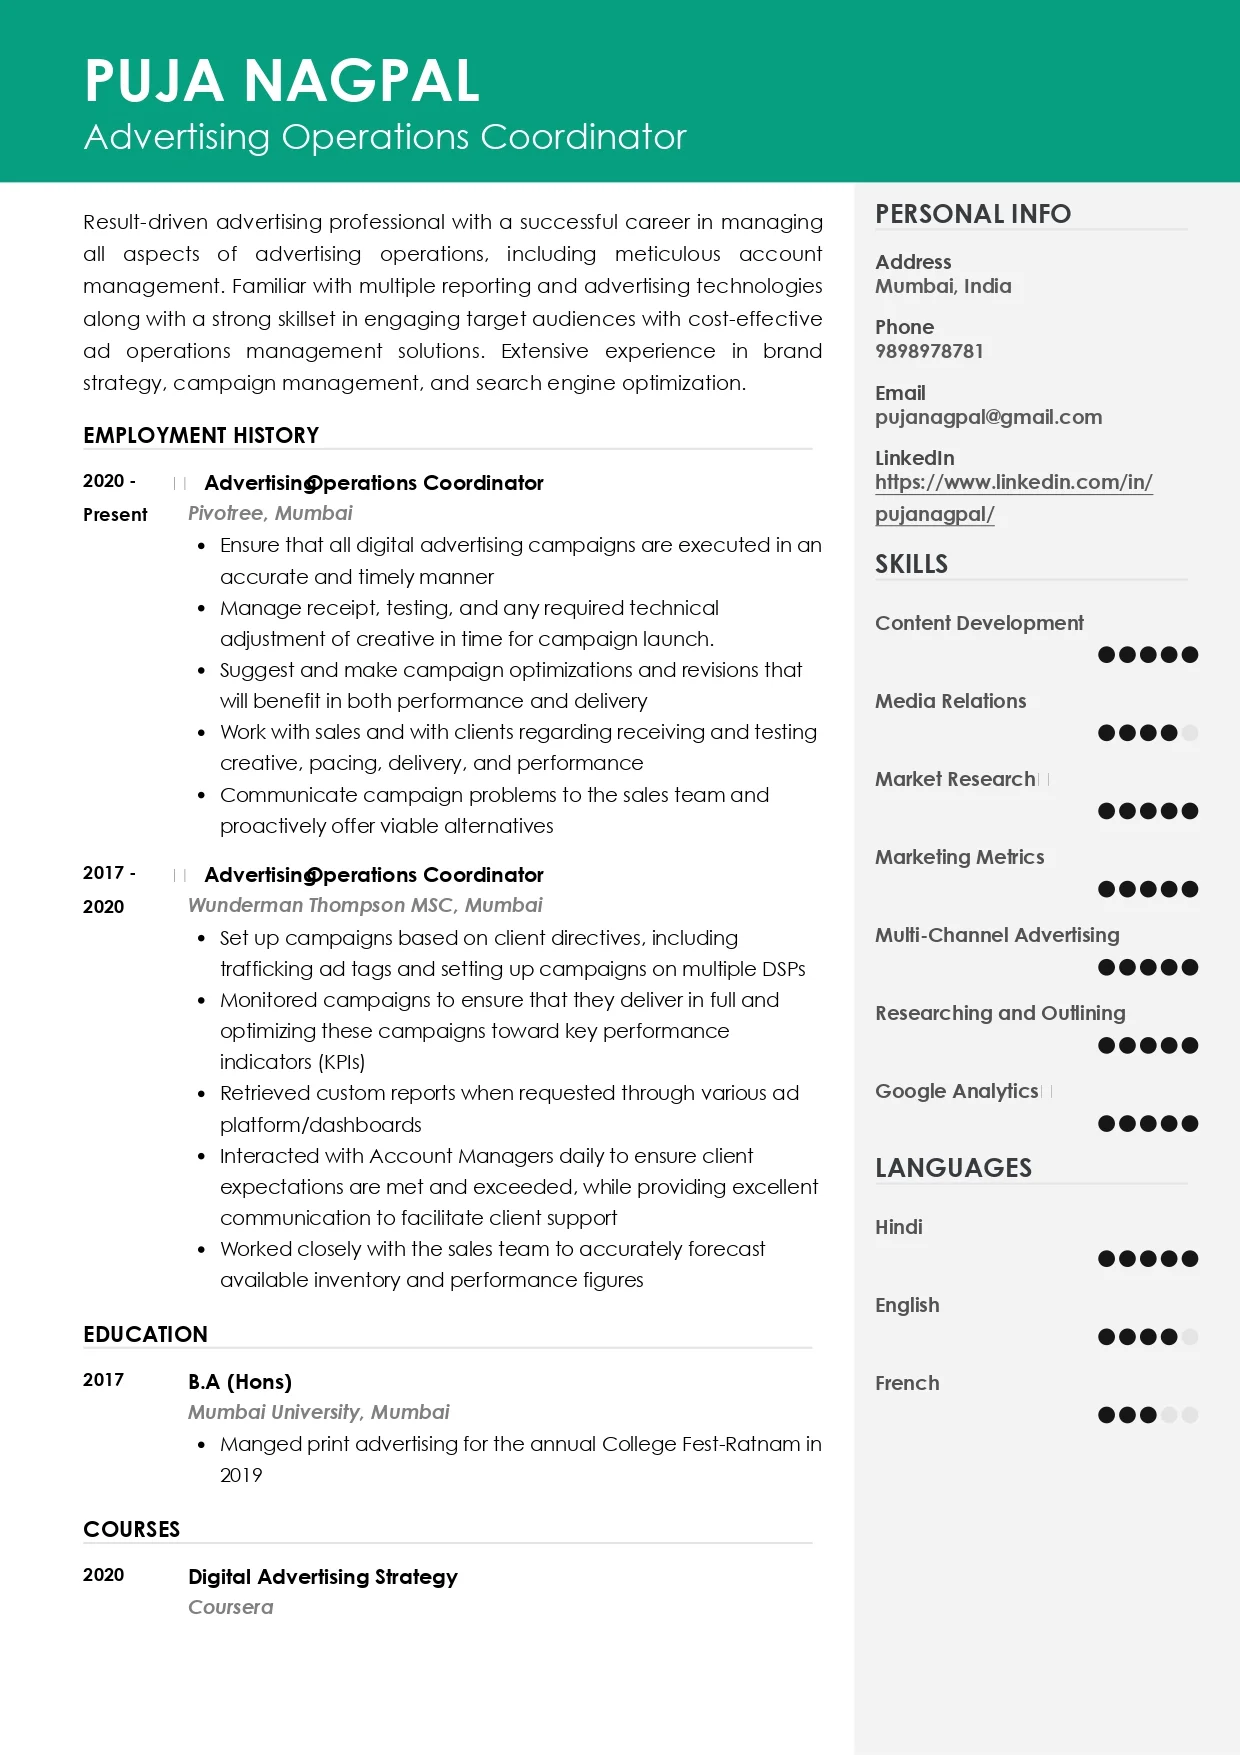 Sample Resume of Advertising Operations Coordinator | Free Resume Templates & Samples on Resumod.co